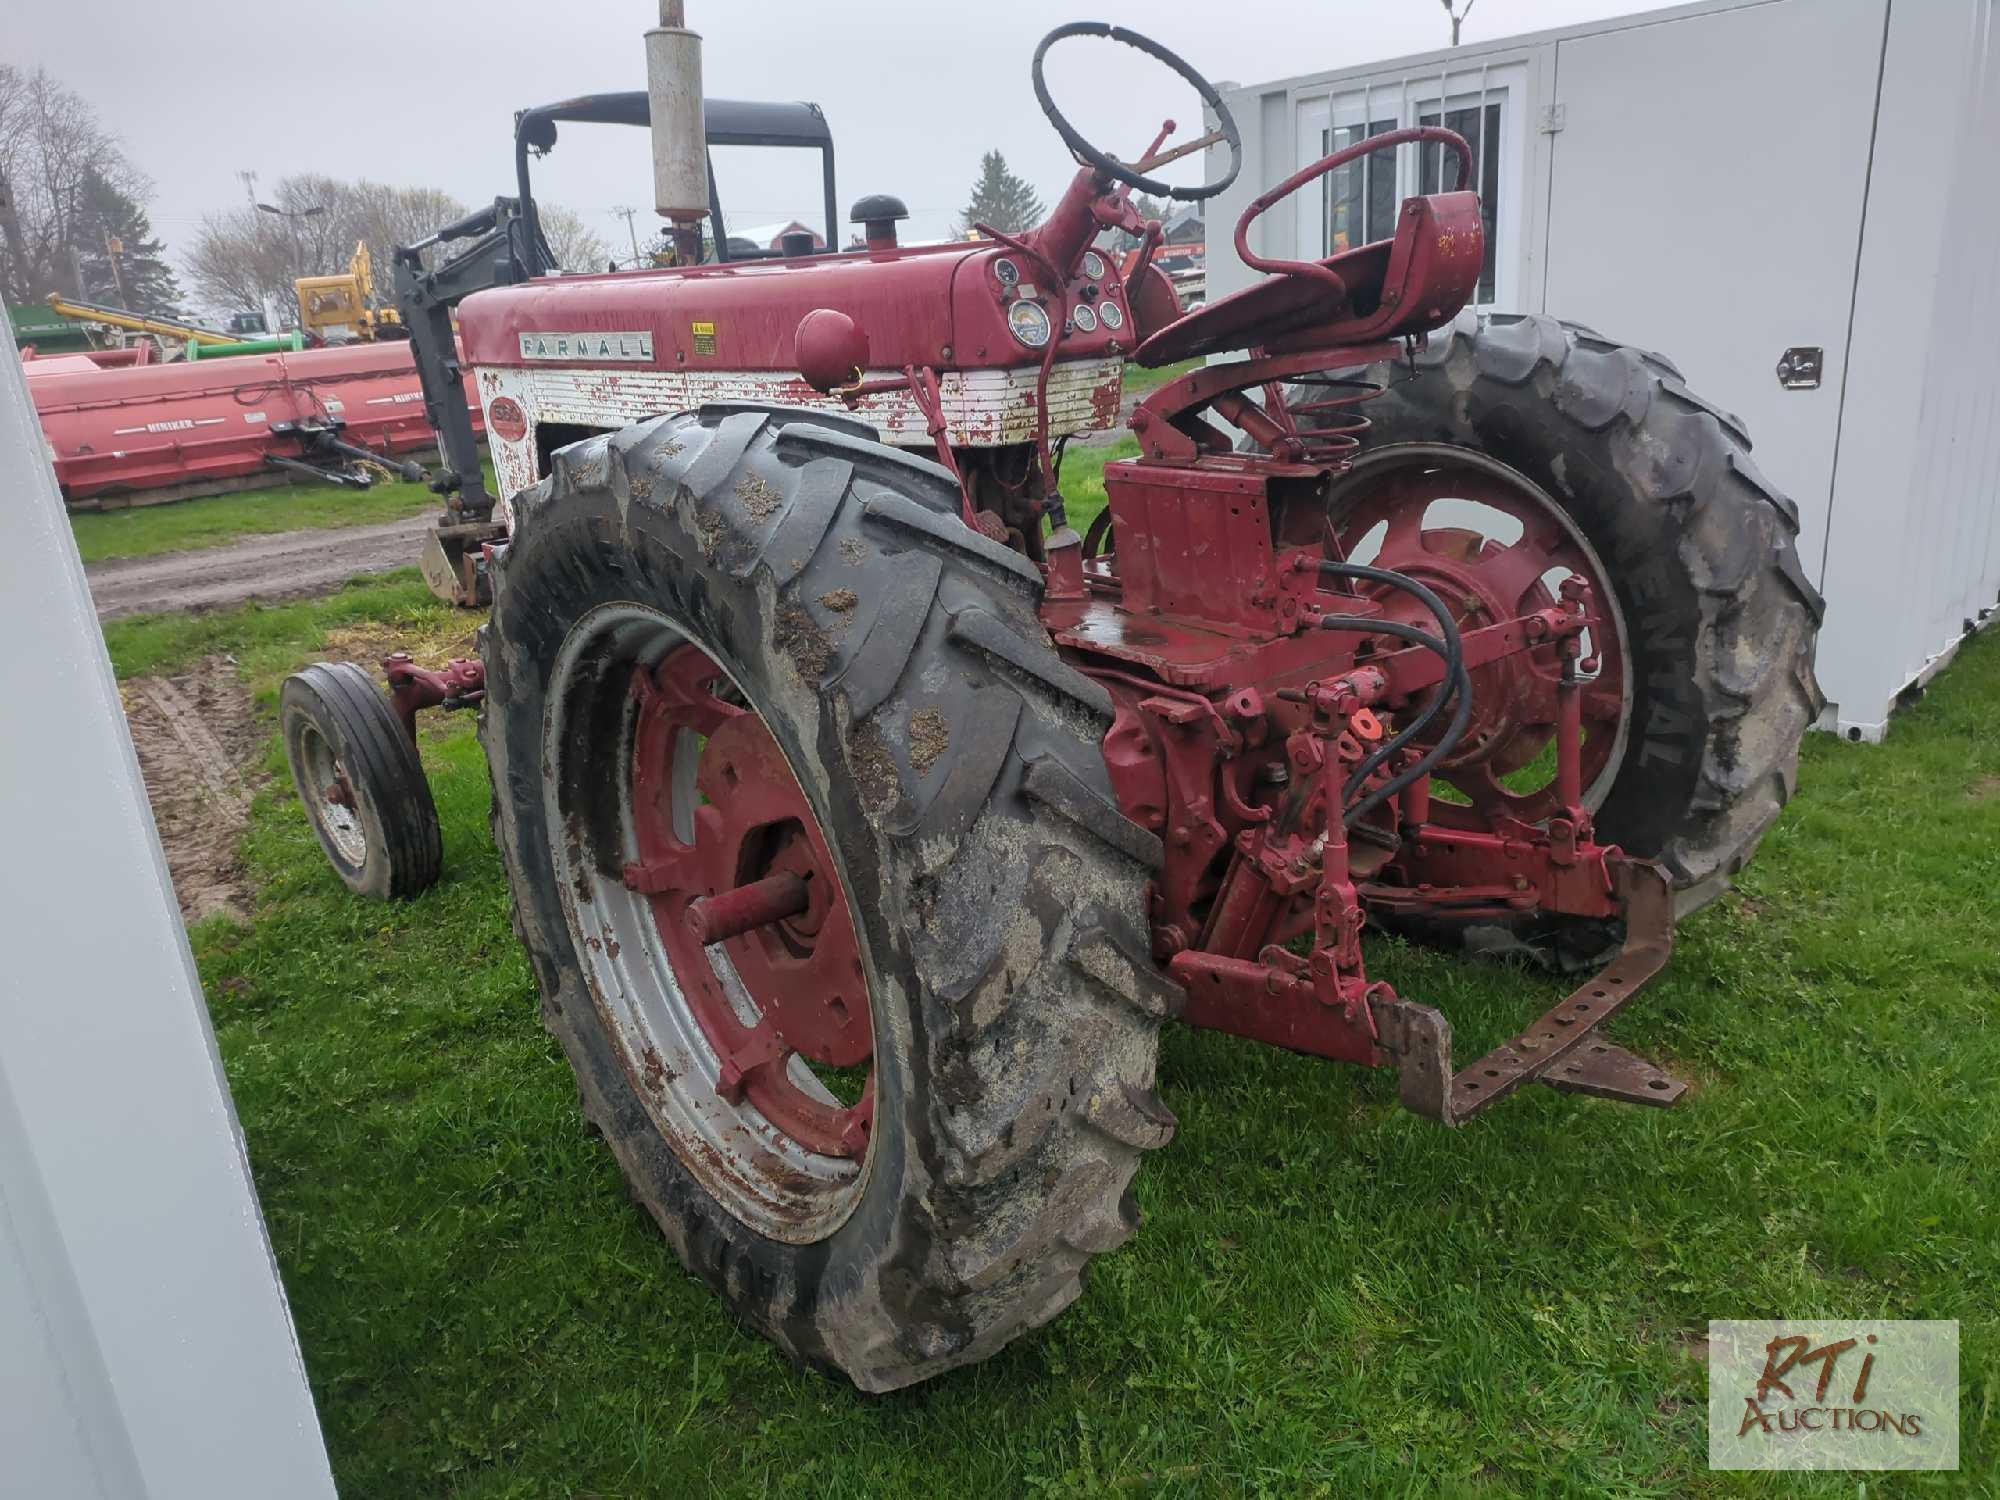 Farmall 560 gas tractor, 2 remotes, power steering not working